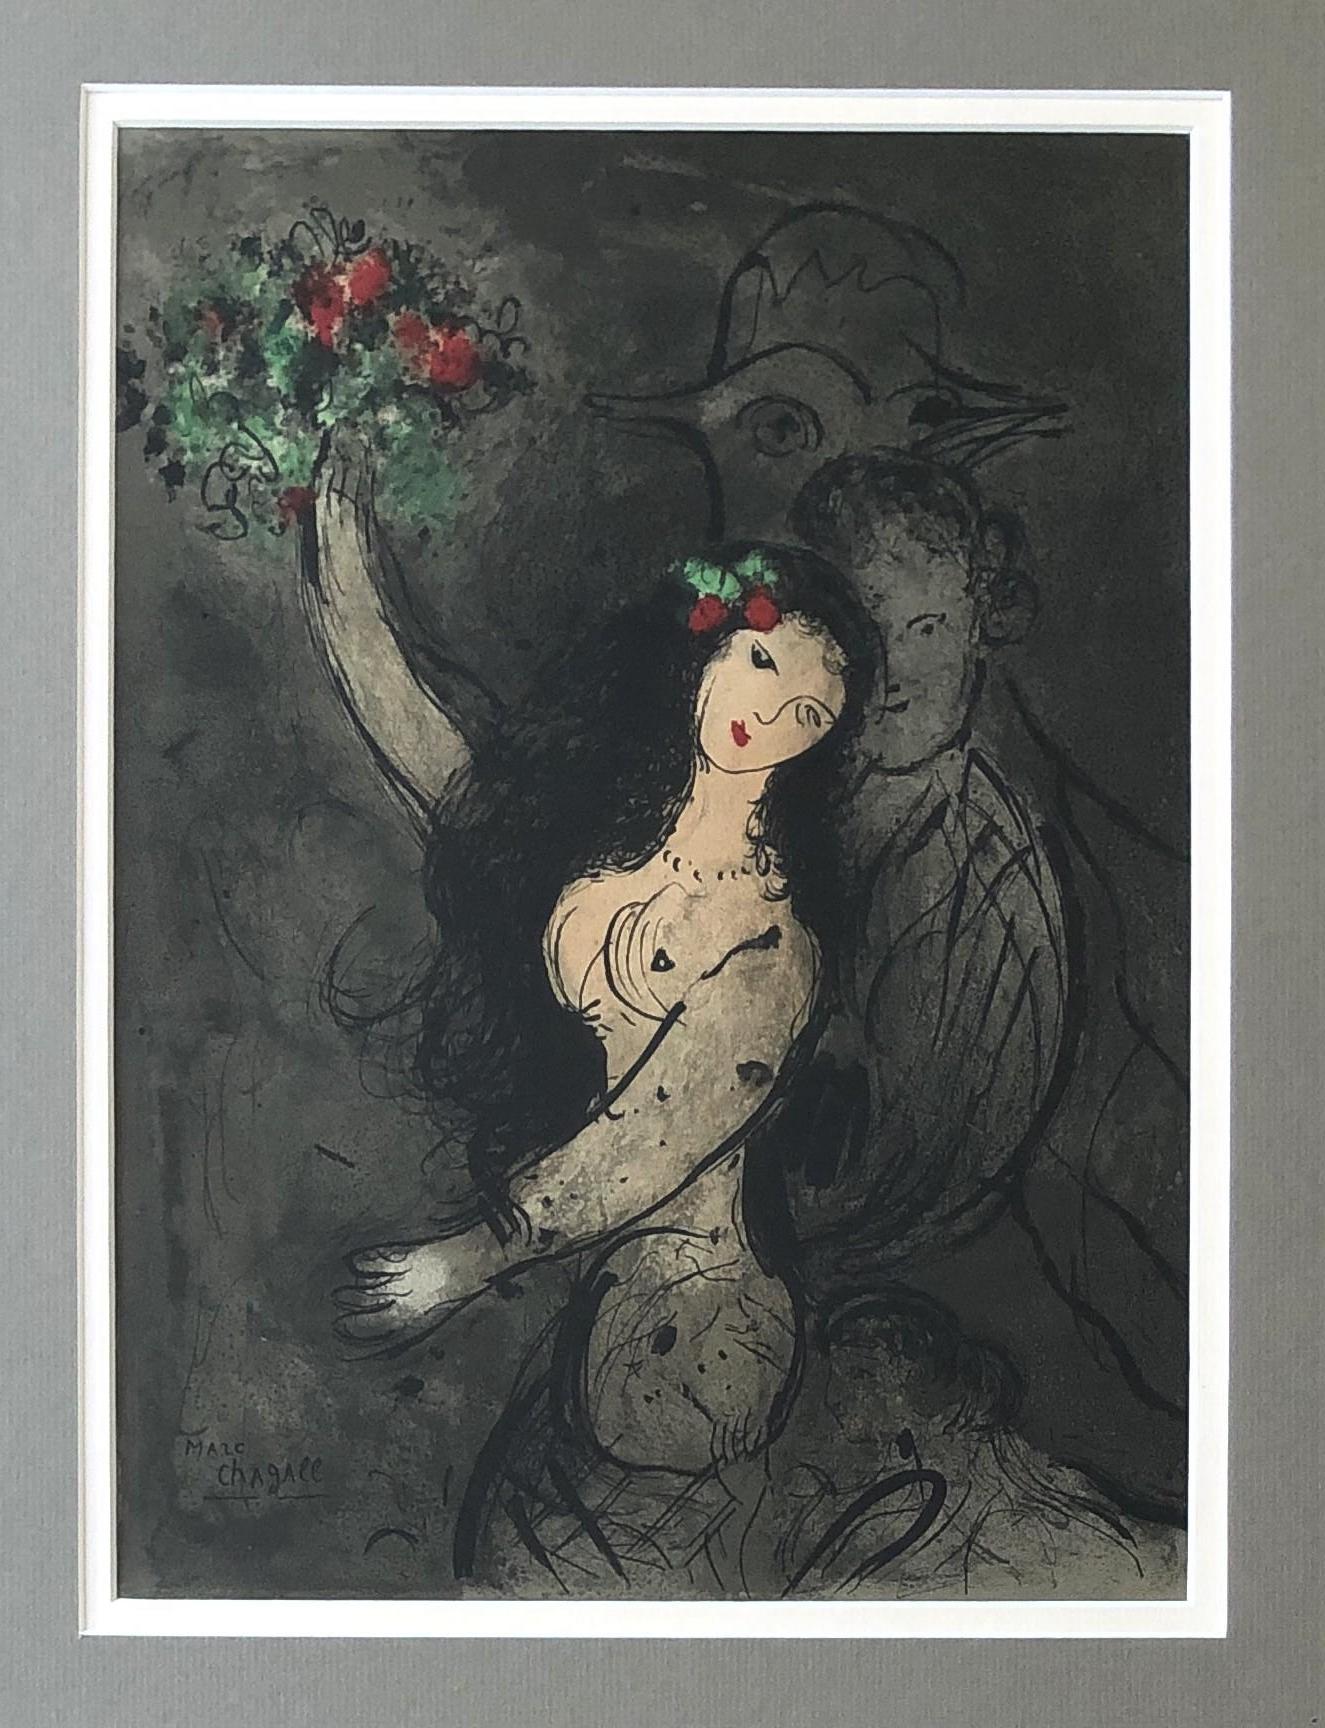 Marc Chagall Figurative Print - Woman With Flowers - Original Lithograph Signed in the Plate - Mourlot 383